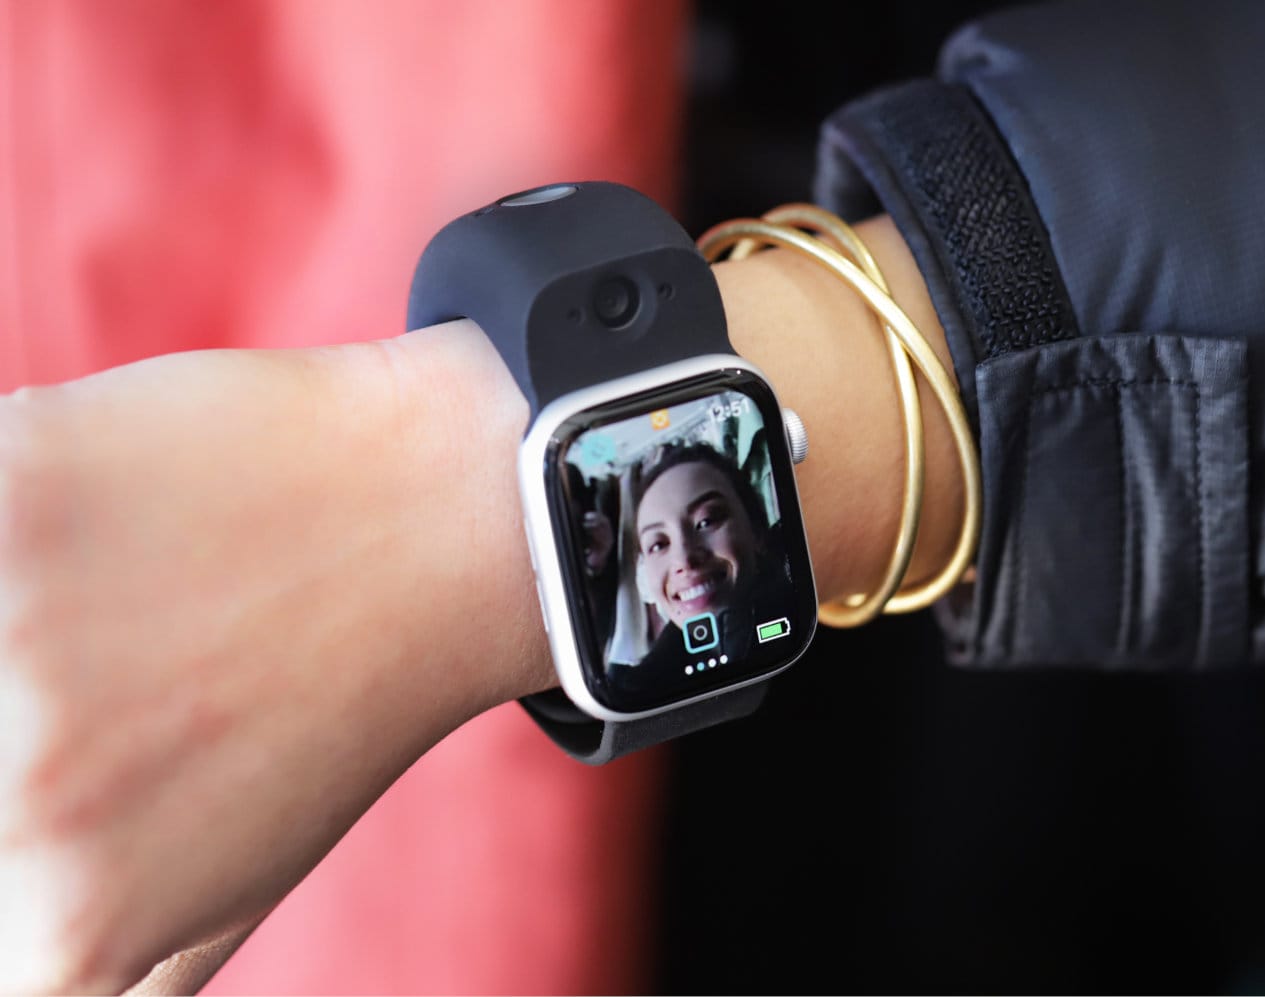 Wristcam gives your Apple Watch dual cameras and live video messaging.